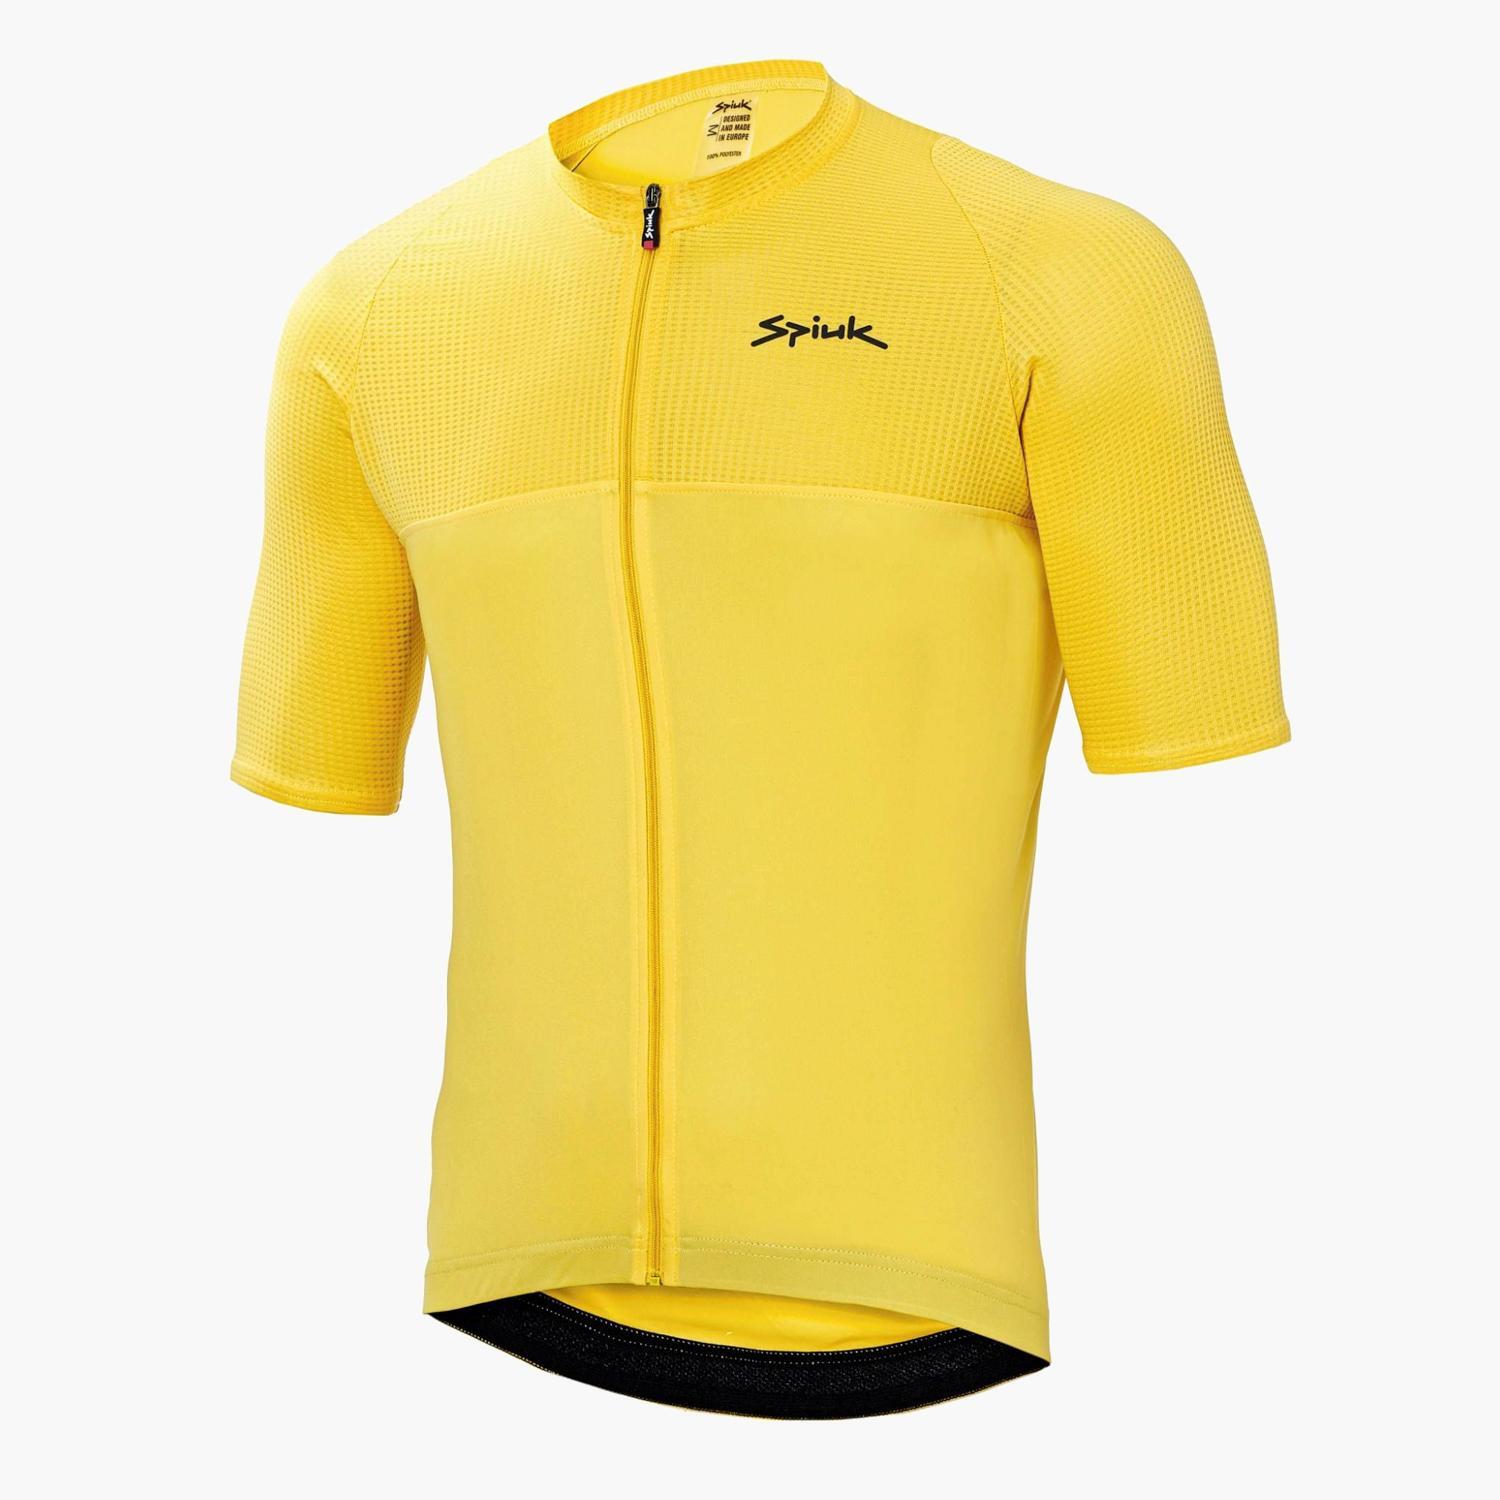 Spiuk Anatomic - Jaune - Maillot Cyclisme Homme sports taille 2XL